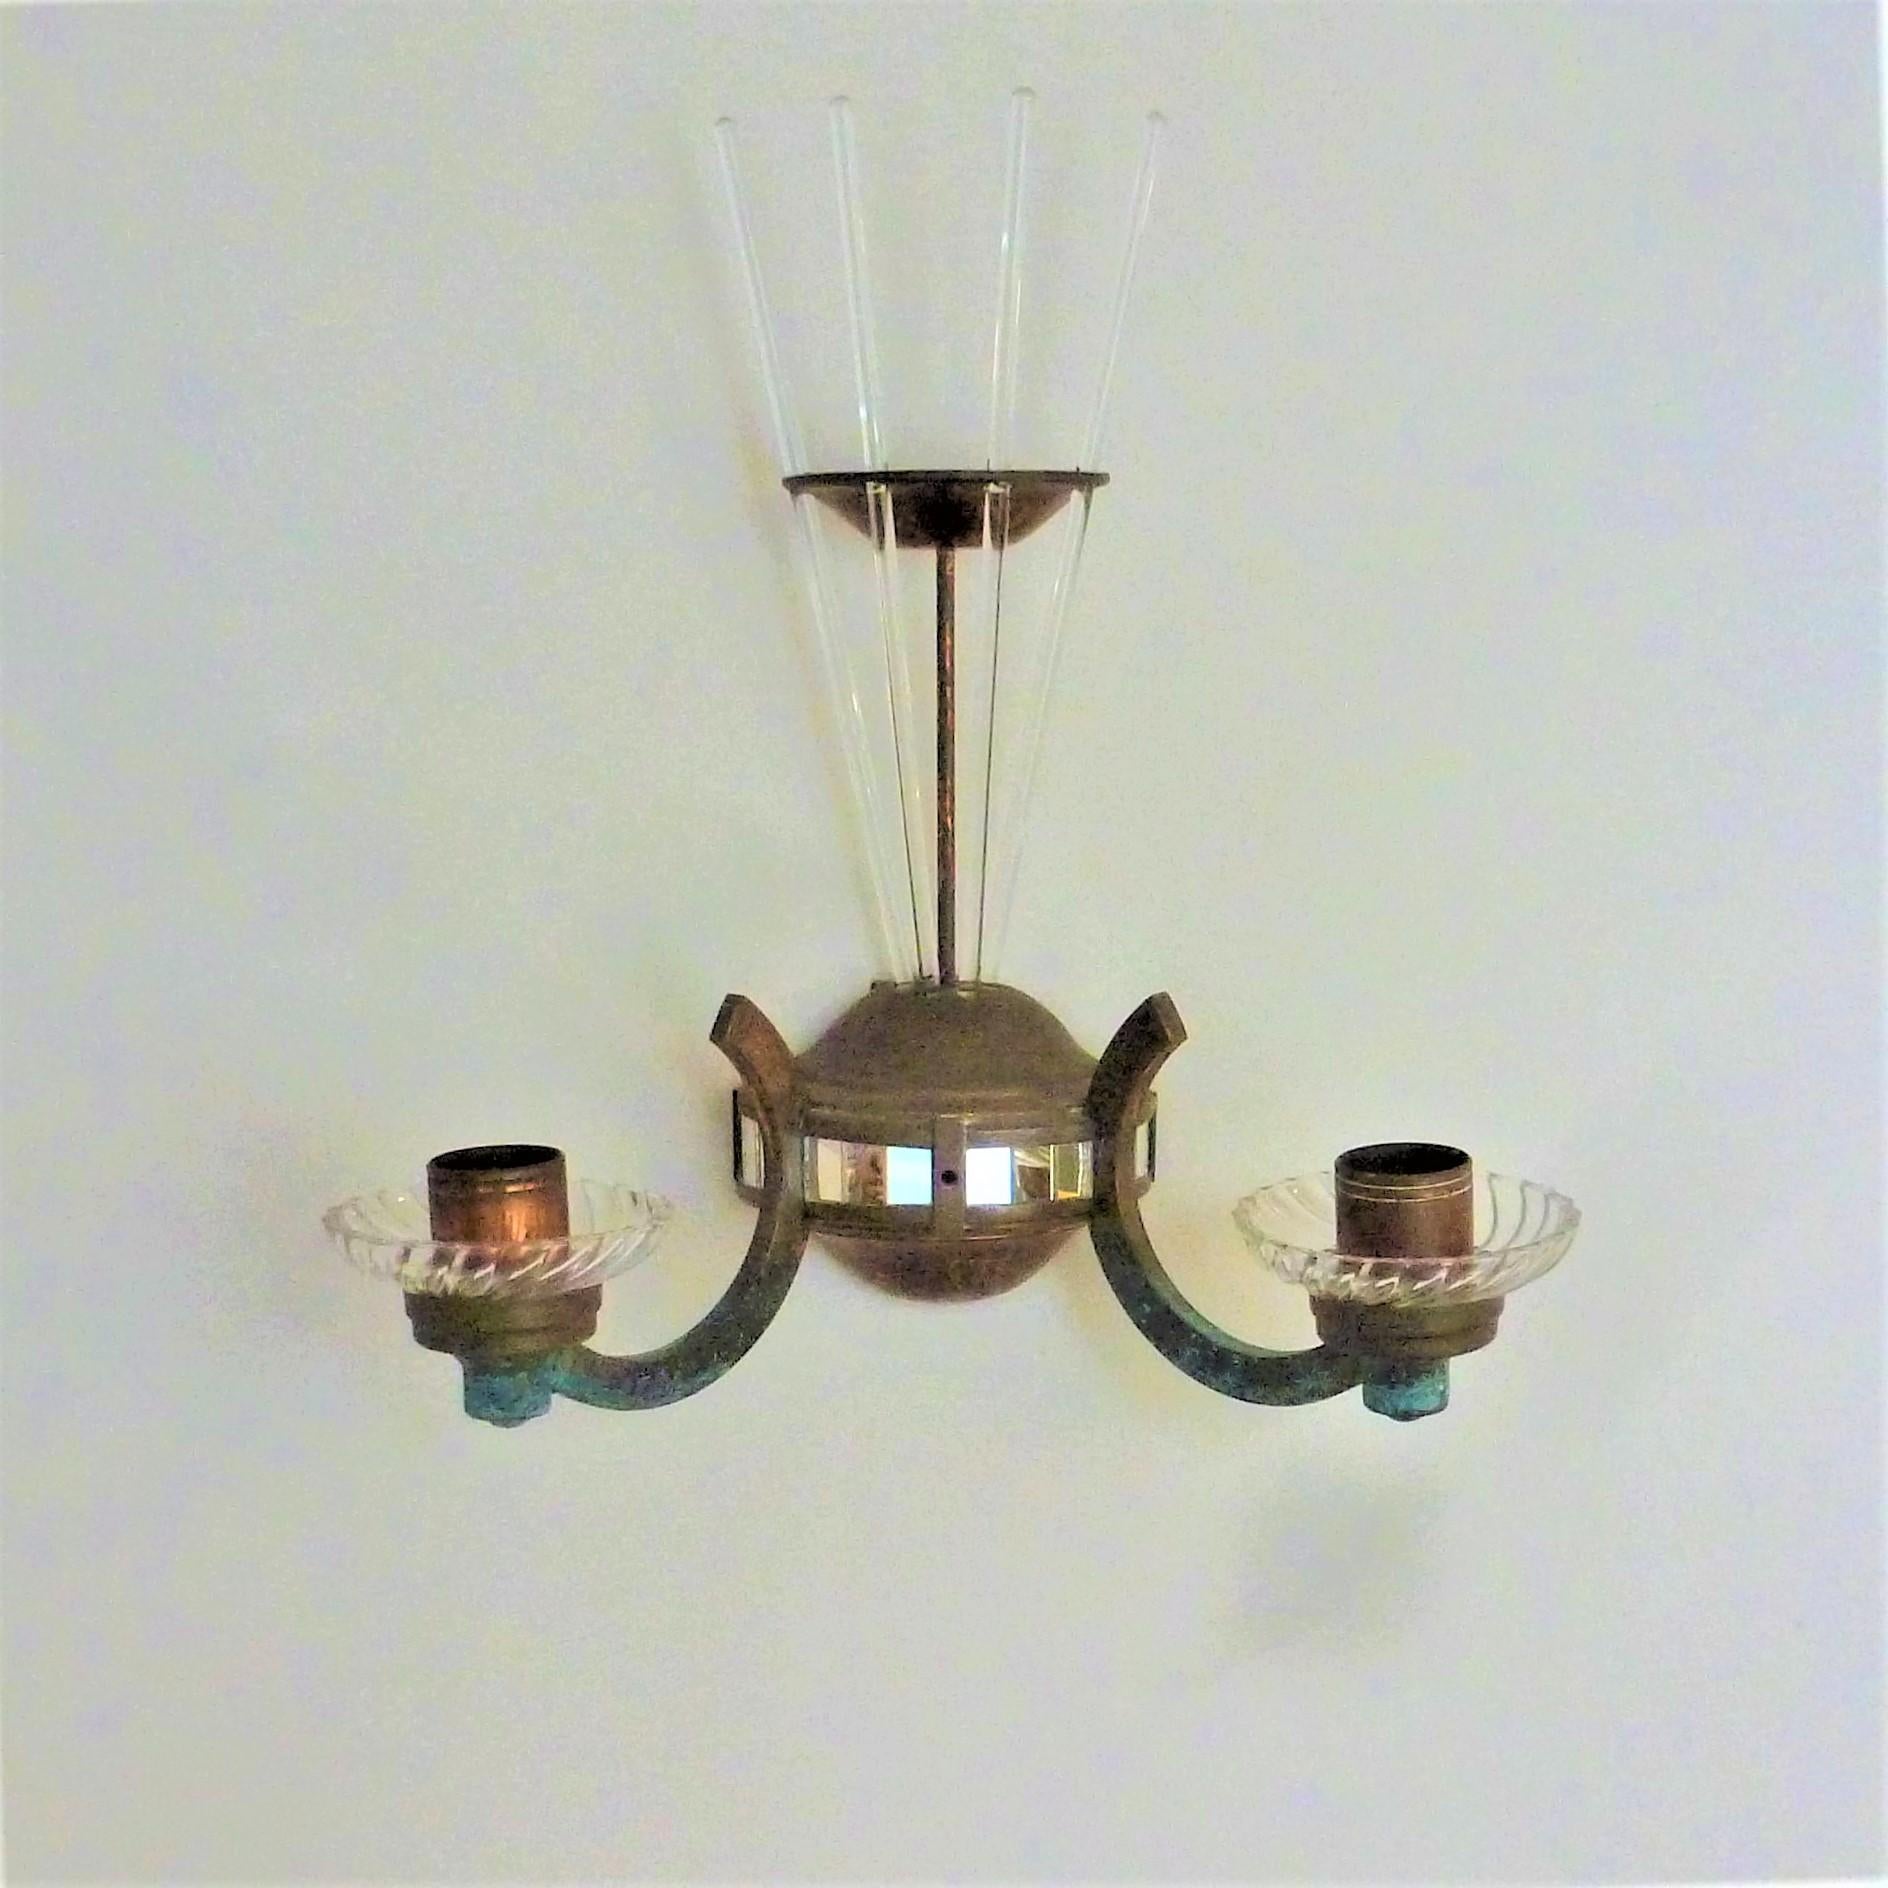 Stunning pair of French Art Deco wall scones.
Made from copper and glass.
2 core wire (French); will take bayonnet light bulbs.

Good condition, nothing damaged or broken. 
One has 